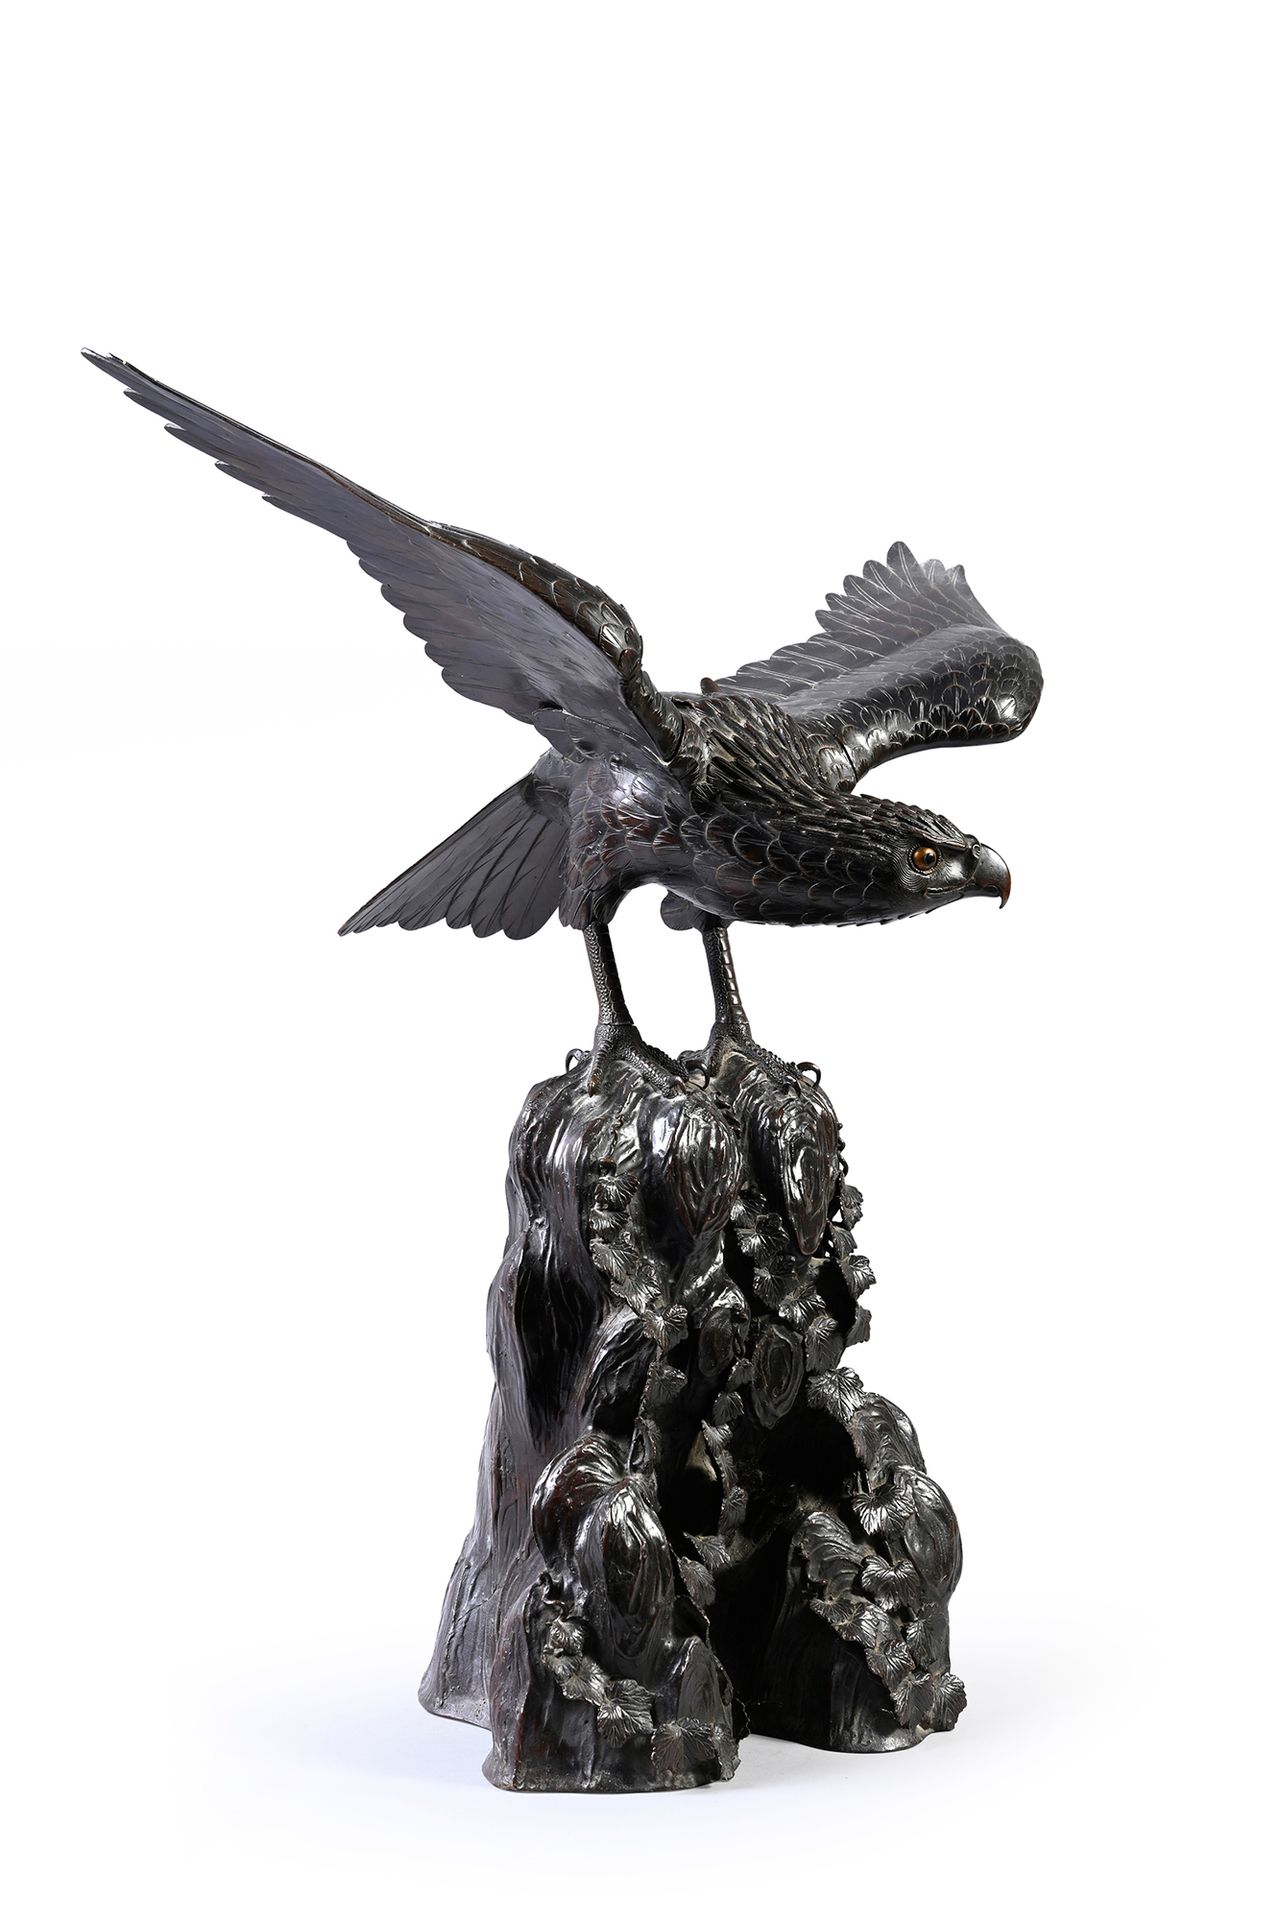 JAPON, Époque Meiji Eagle in bronze
Represented in a naturalistic way, perched i&hellip;